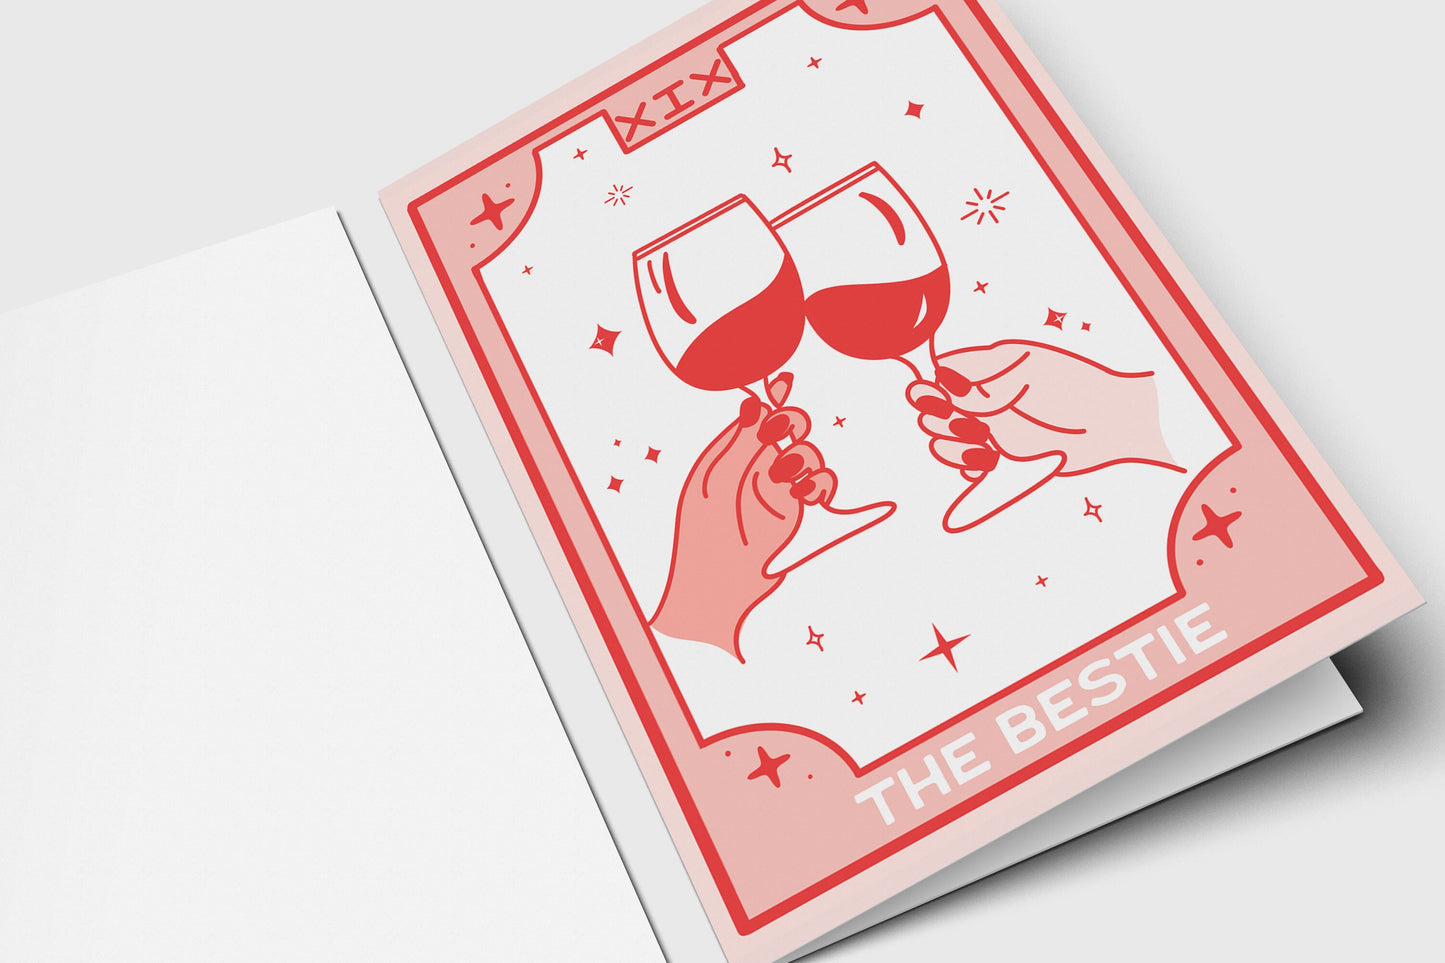 Tarot Greeting Card - The Bestie - Unique - For BFF - For Friend - Just Because - Best Friend - Hype Women - Feminist - Girl Power